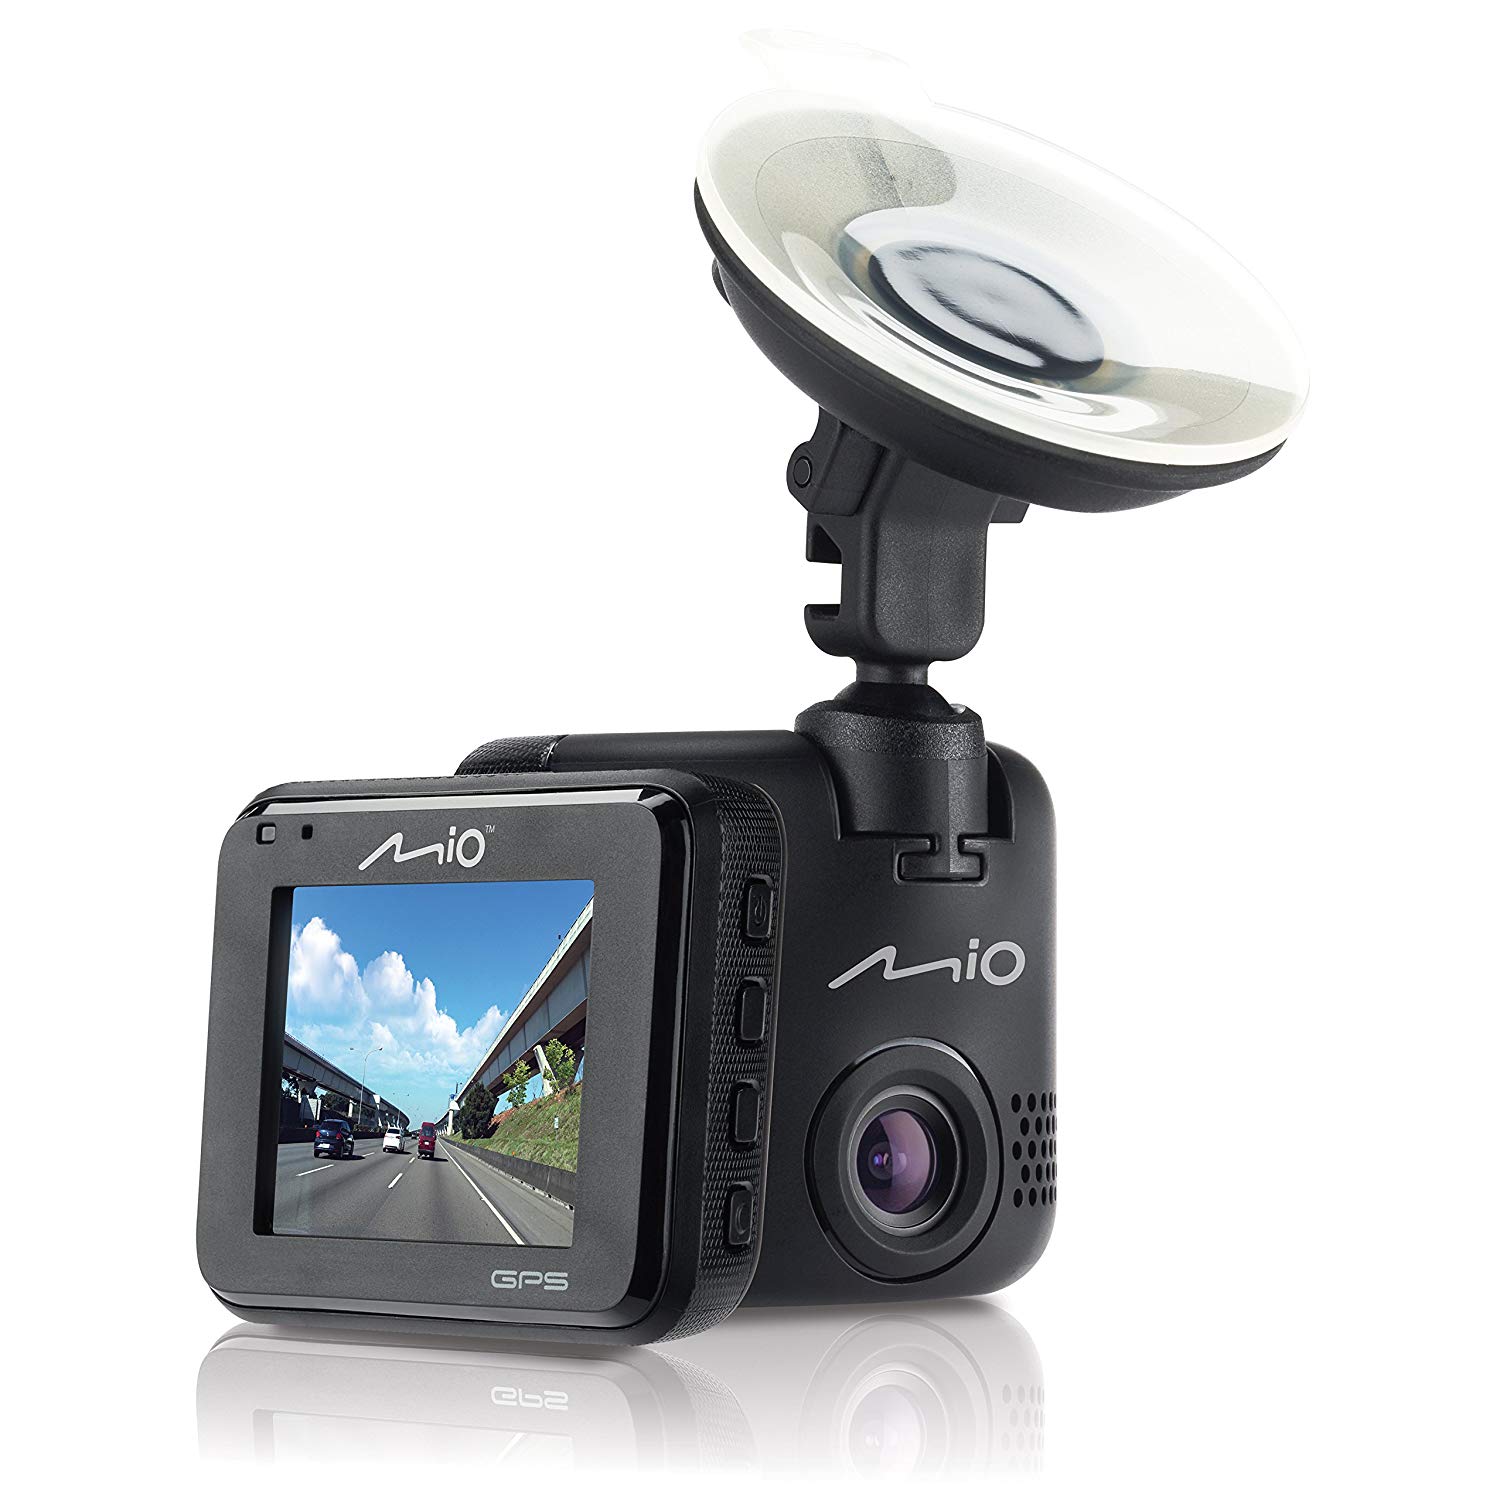 Top 15 Best HD Dash Cams! Quick Buying Guide (2022 Updated) – Peak Home